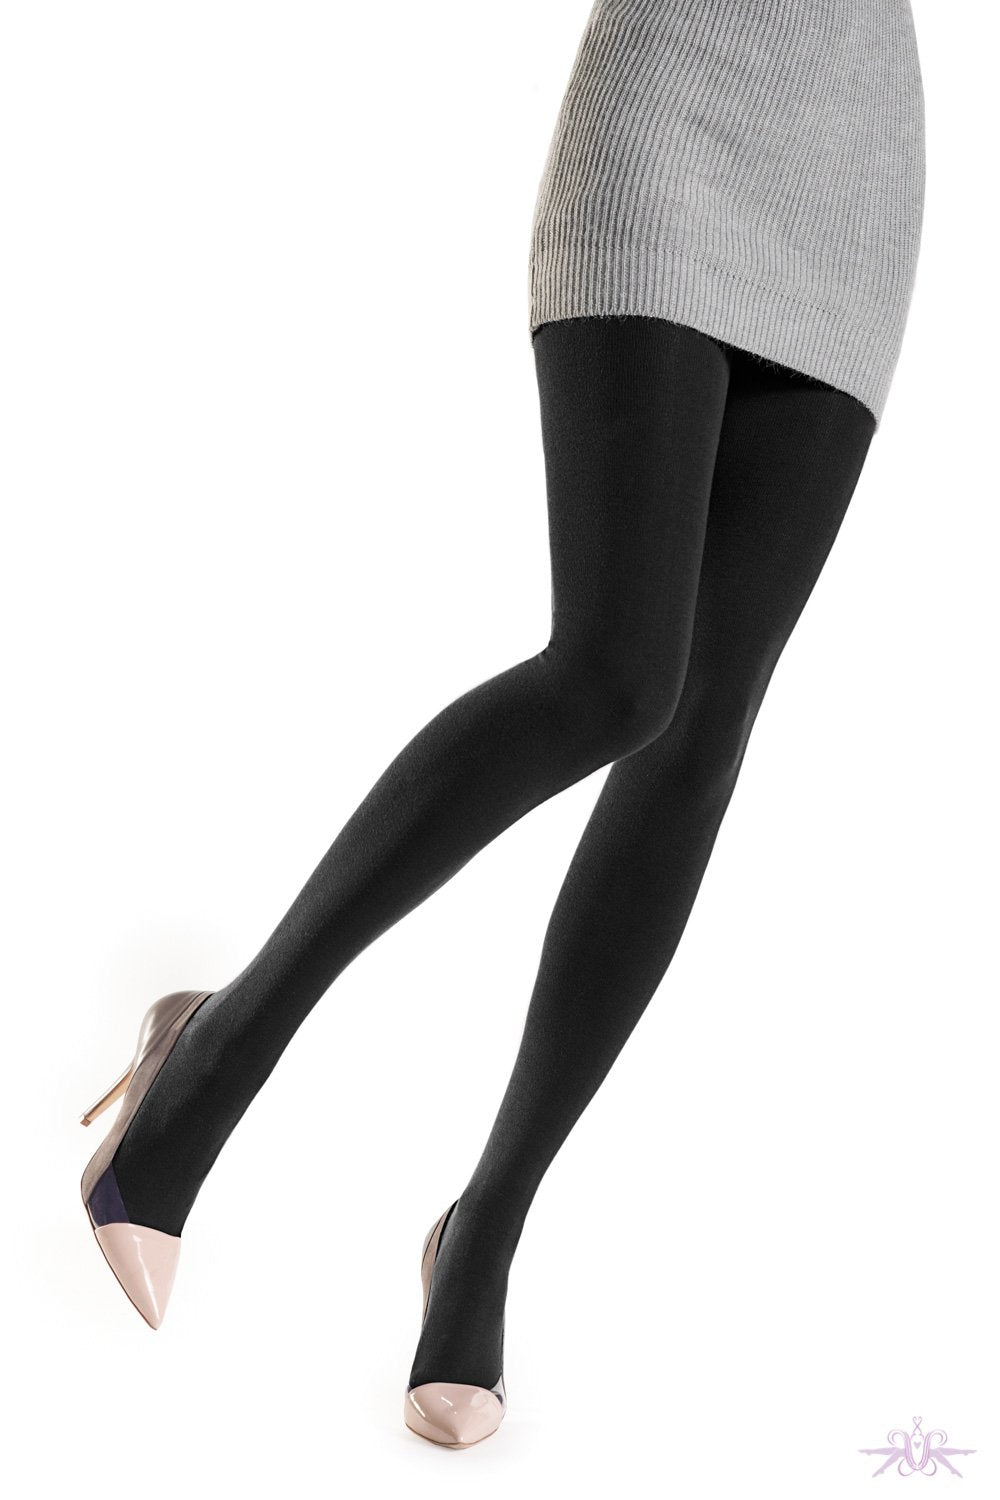 Opaque Tights at The Hosiery Box: Your Tights Store